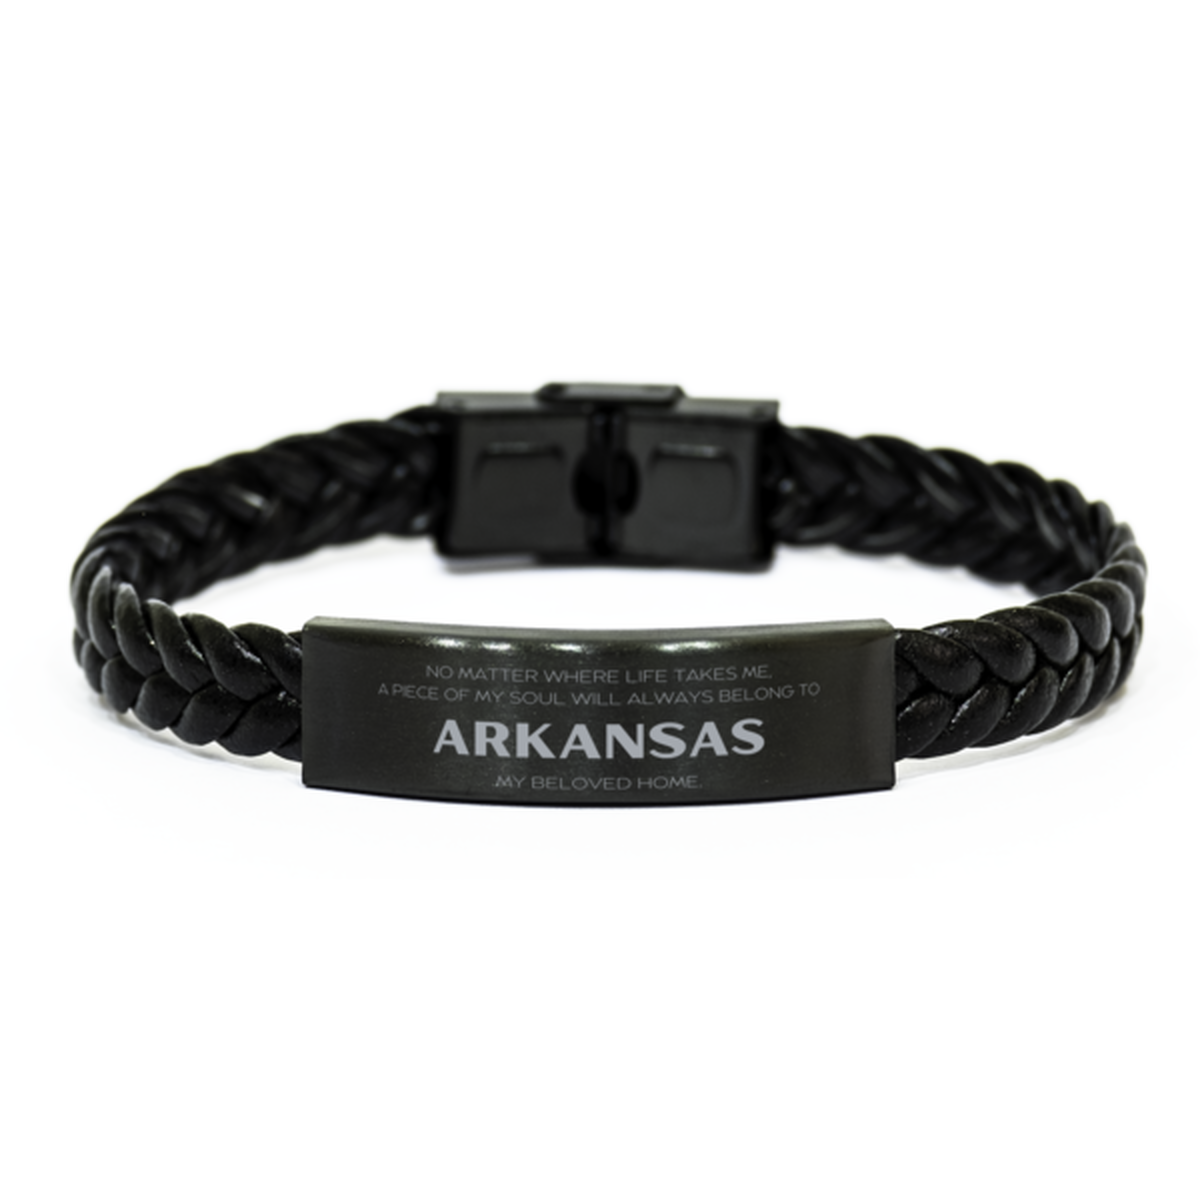 Love Arkansas State Gifts, My soul will always belong to Arkansas, Proud Braided Leather Bracelet, Birthday Unique Gifts For Arkansas Men, Women, Friends